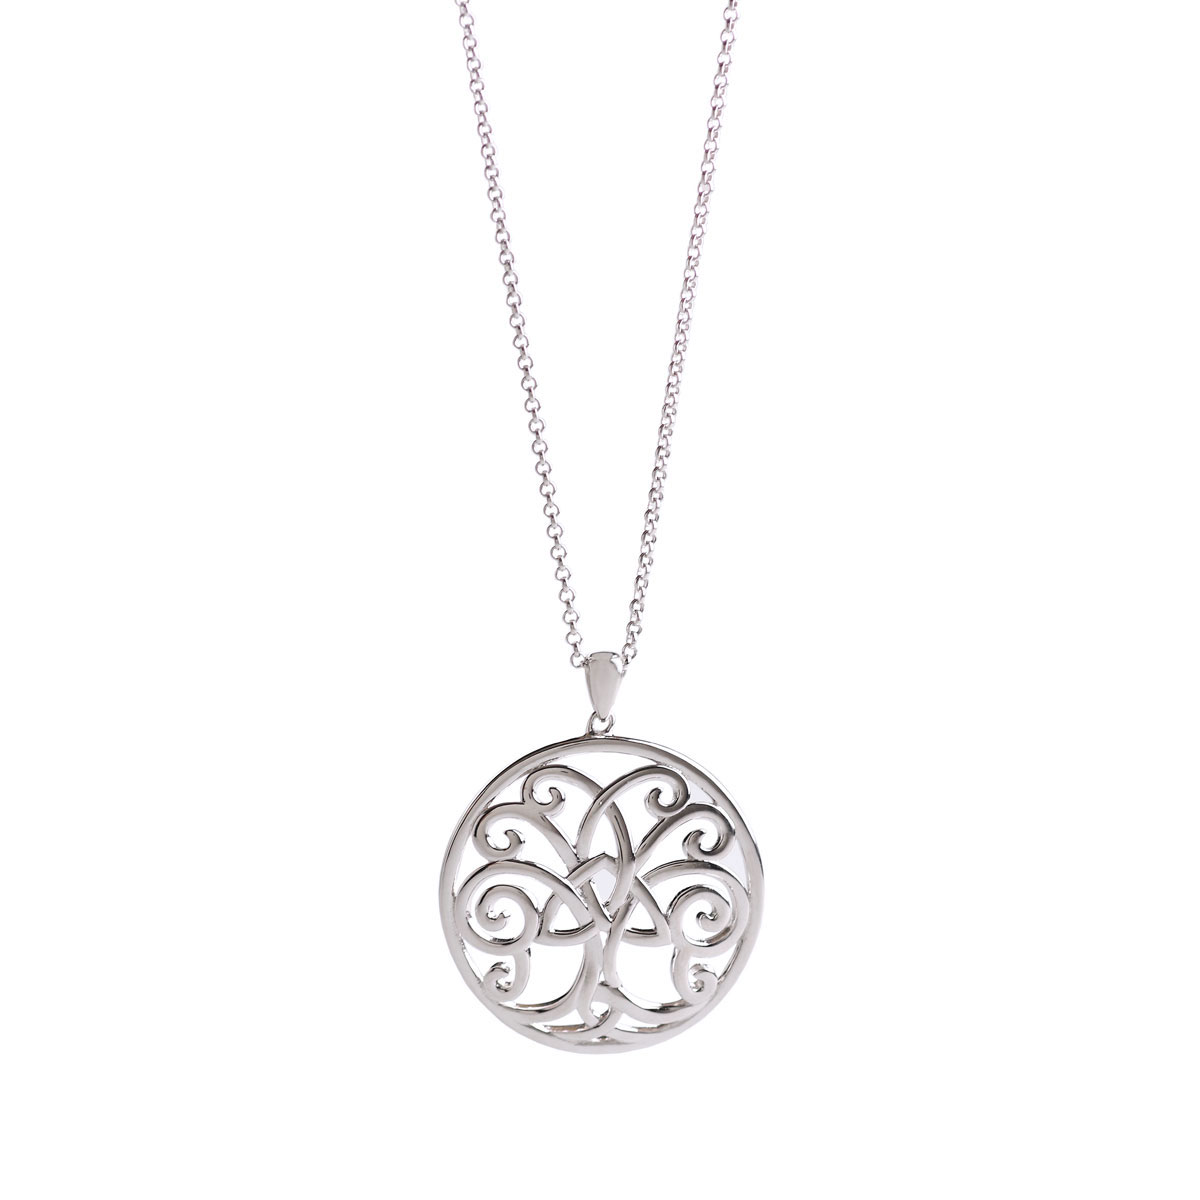 Cashs Ireland, Sterling Silver Tree of Life with Trinity Knot Pendant Necklace